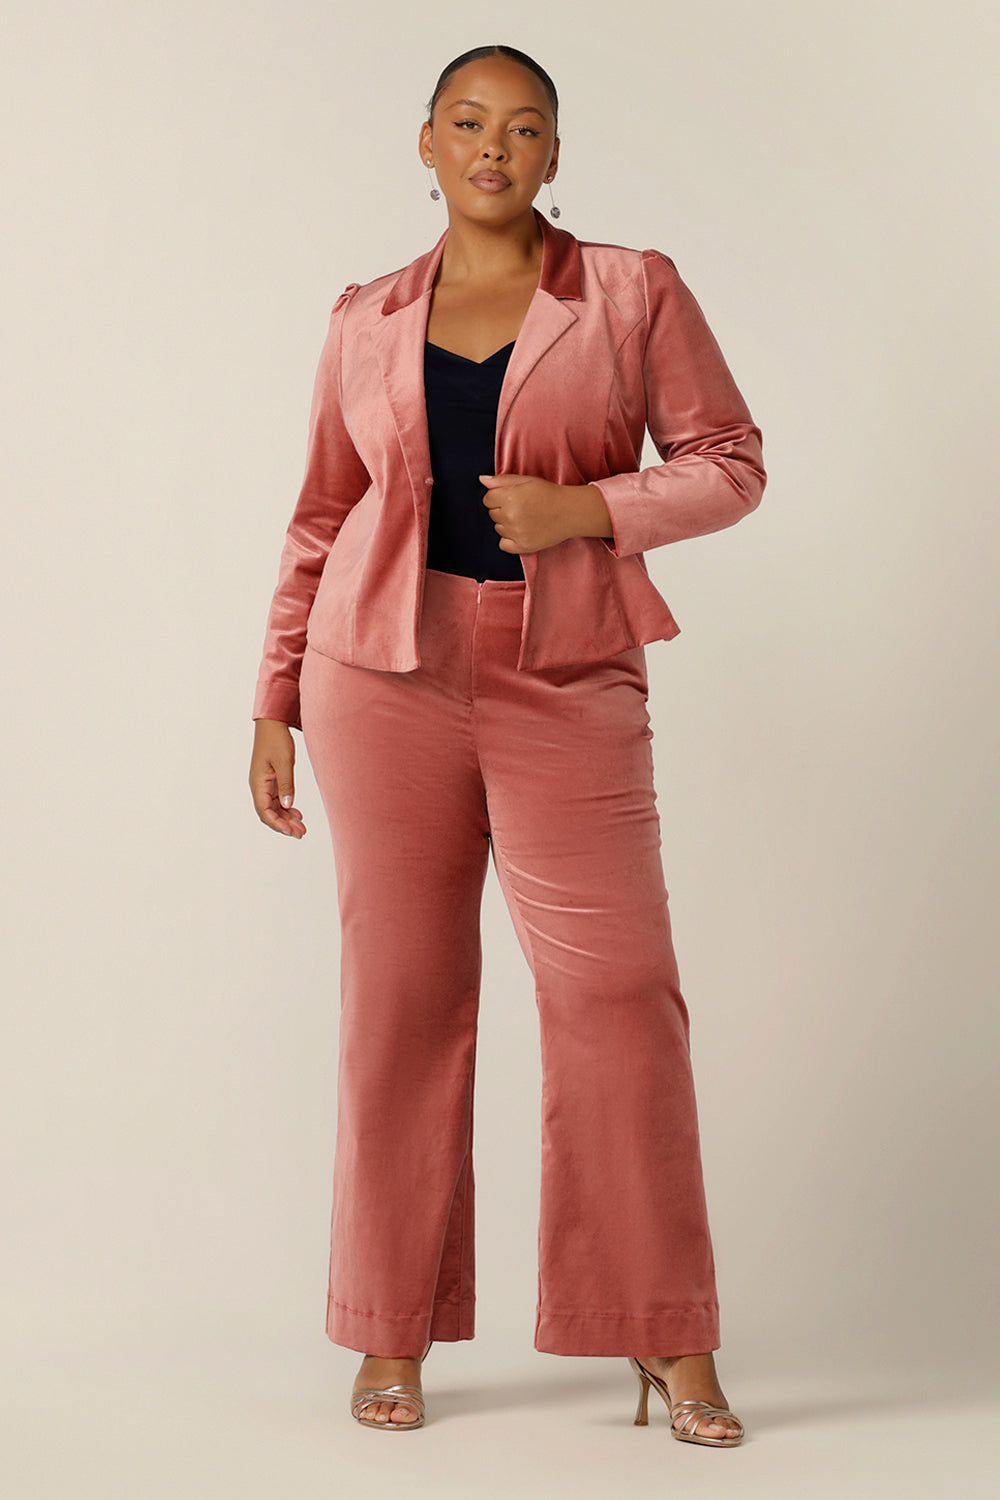 With the feel of a velvet jacket, this luxe Velveteen tailored jacket in musk pink is a great occasion and eveningwear jacket. Worn with a black cami top and flared leg velvet look pants in musk pink, this after 5 jacket is a sophisticated jacket for weddings, cocktail parties and many more occasions!